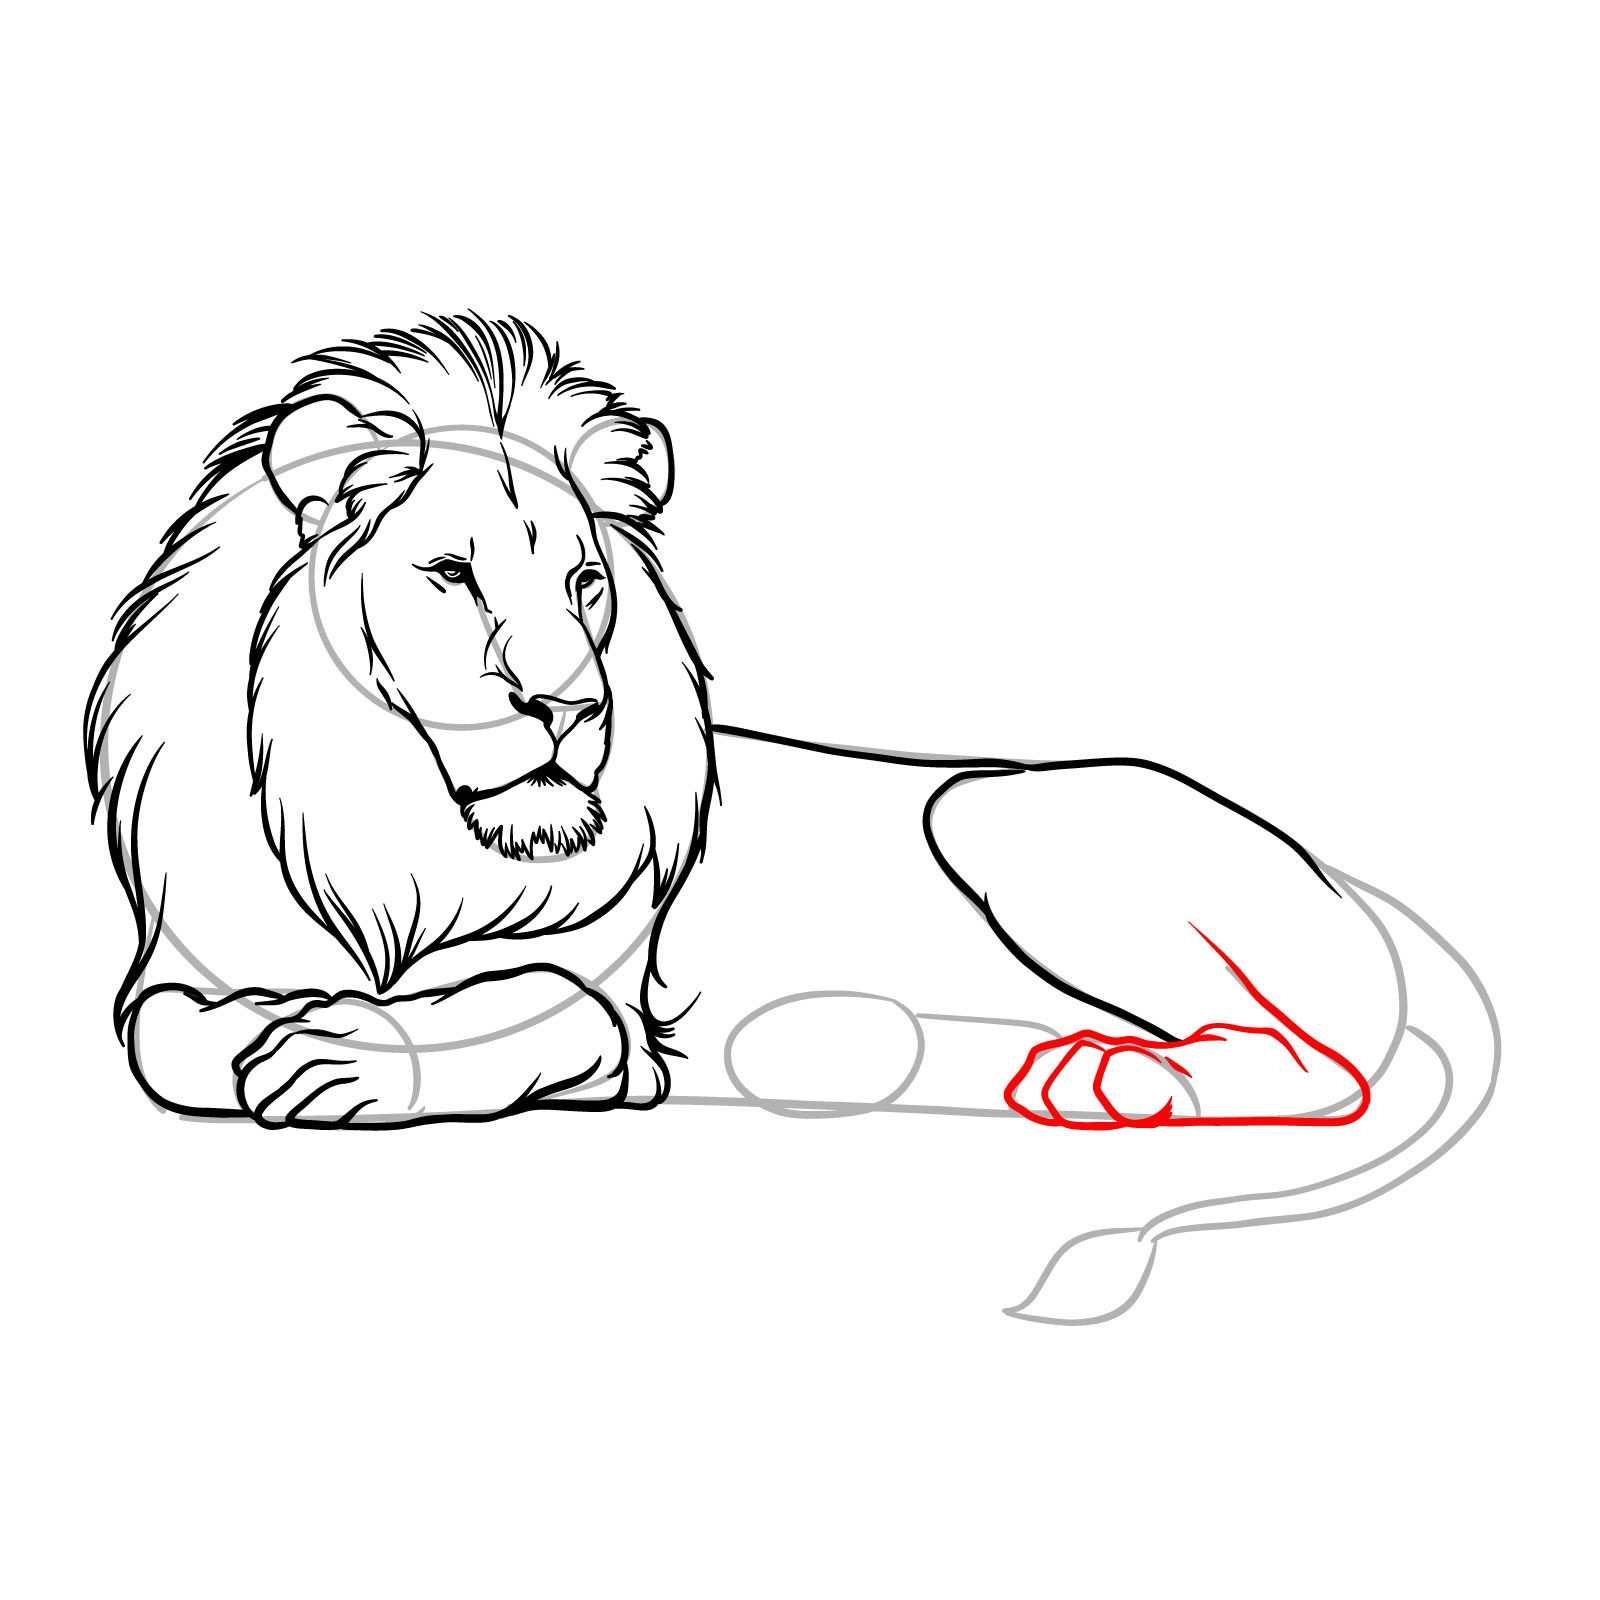 Lying lion drawing - Step 12: Completing the rear leg with toes